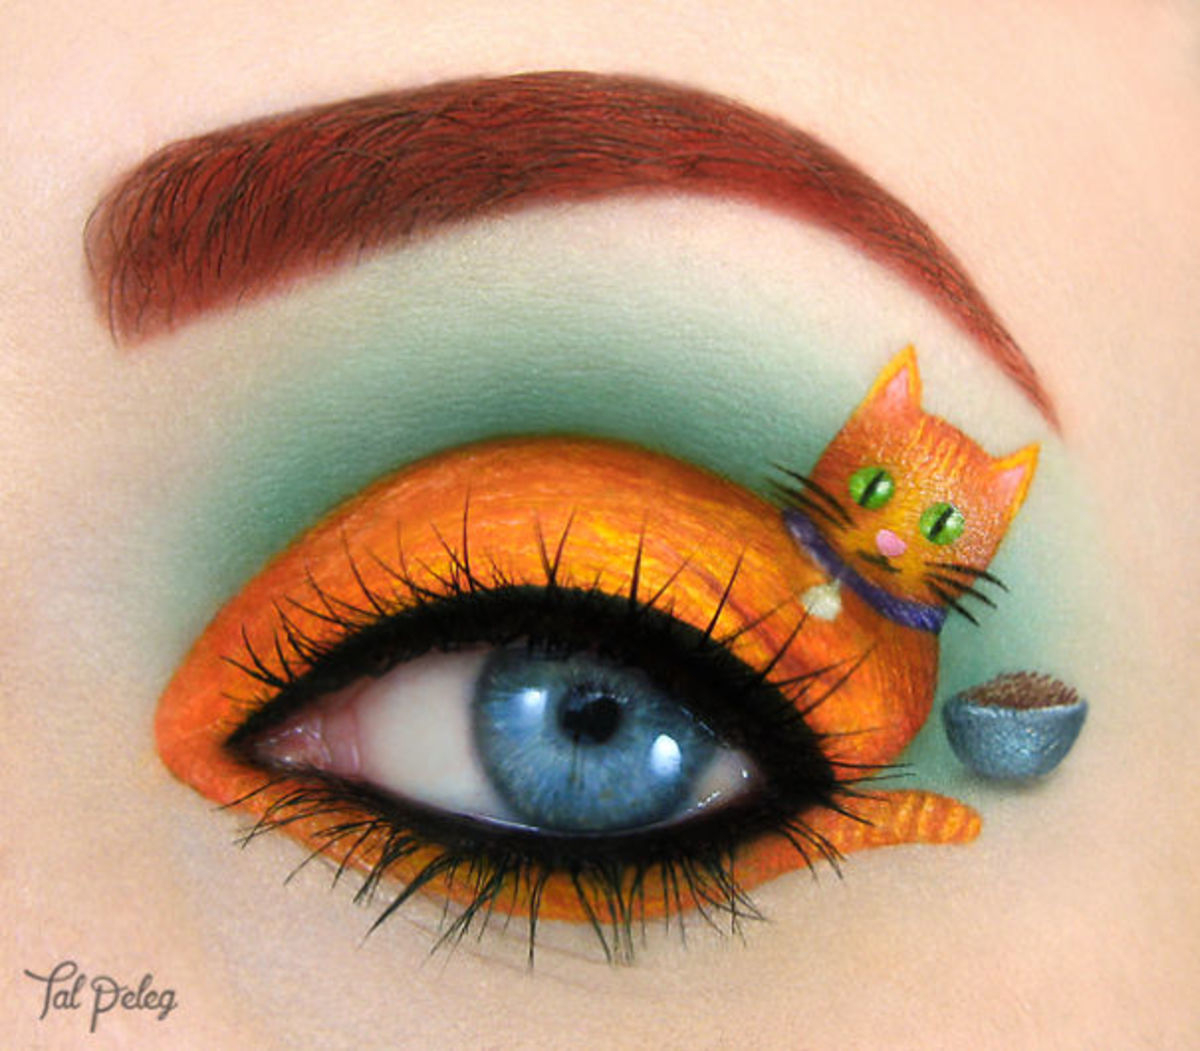 Eye Makeup Art Artist Uses Peoples Eyes As The Canvas For Her Incredible Artworks